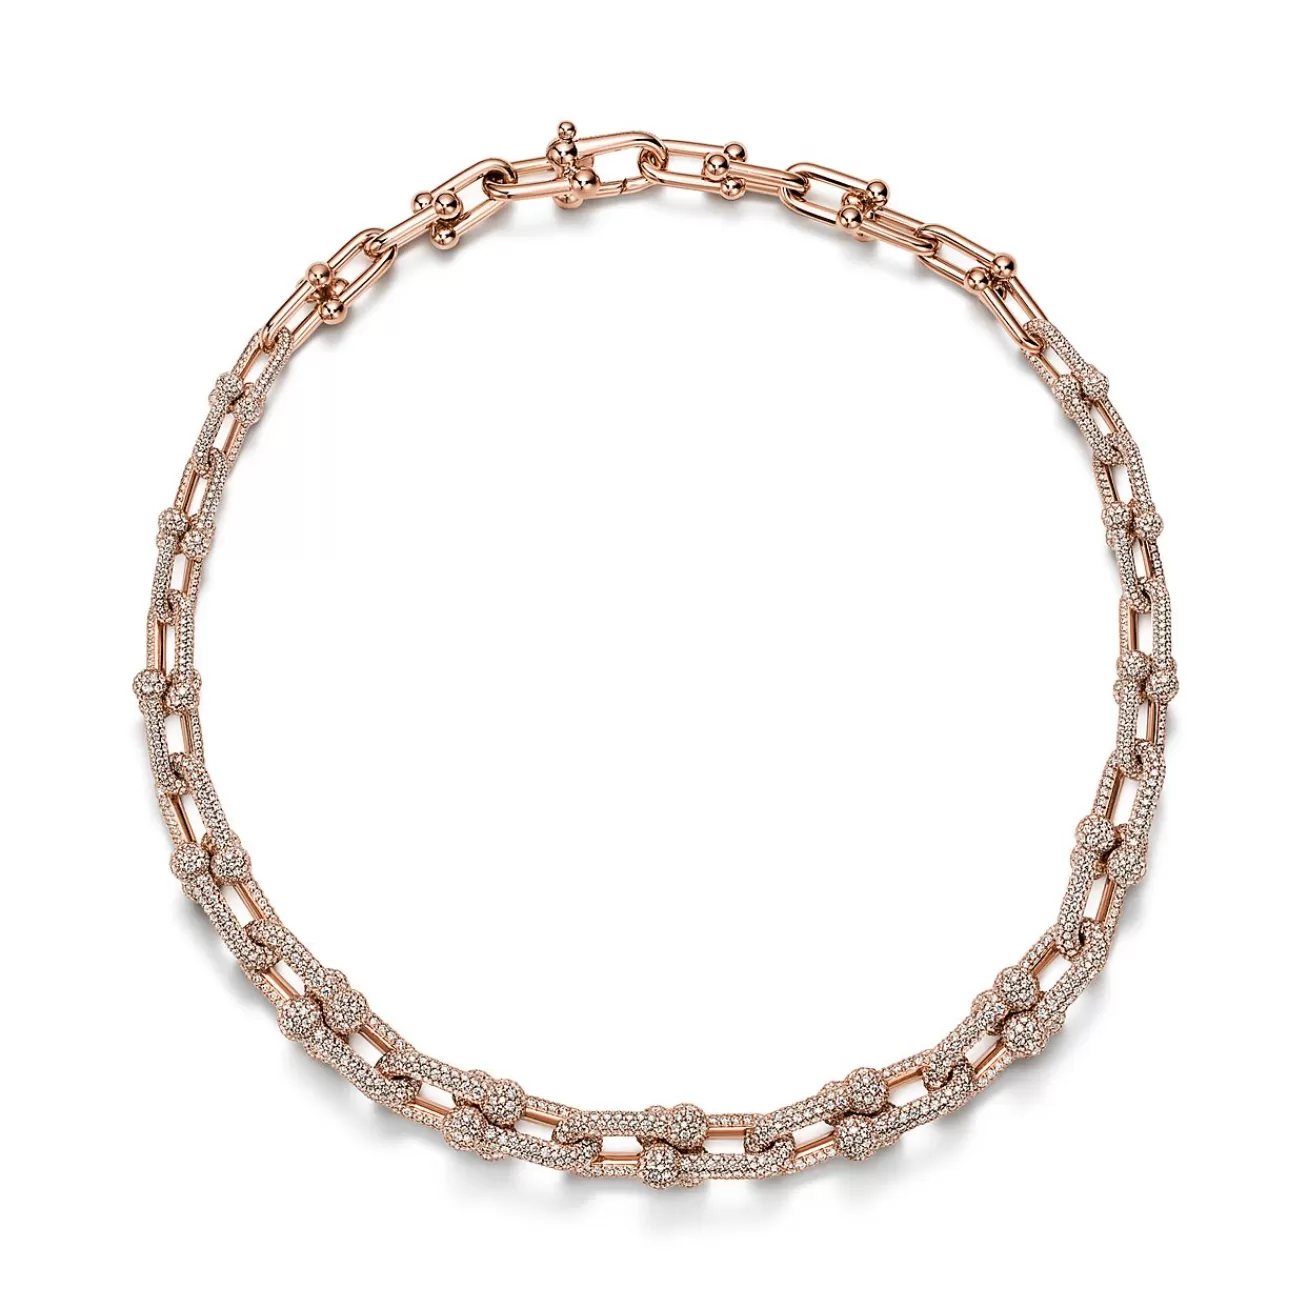 Tiffany & Co. Tiffany HardWear Graduated Link Necklace in Rose Gold with Pavé Diamonds | ^ Necklaces & Pendants | Rose Gold Jewelry